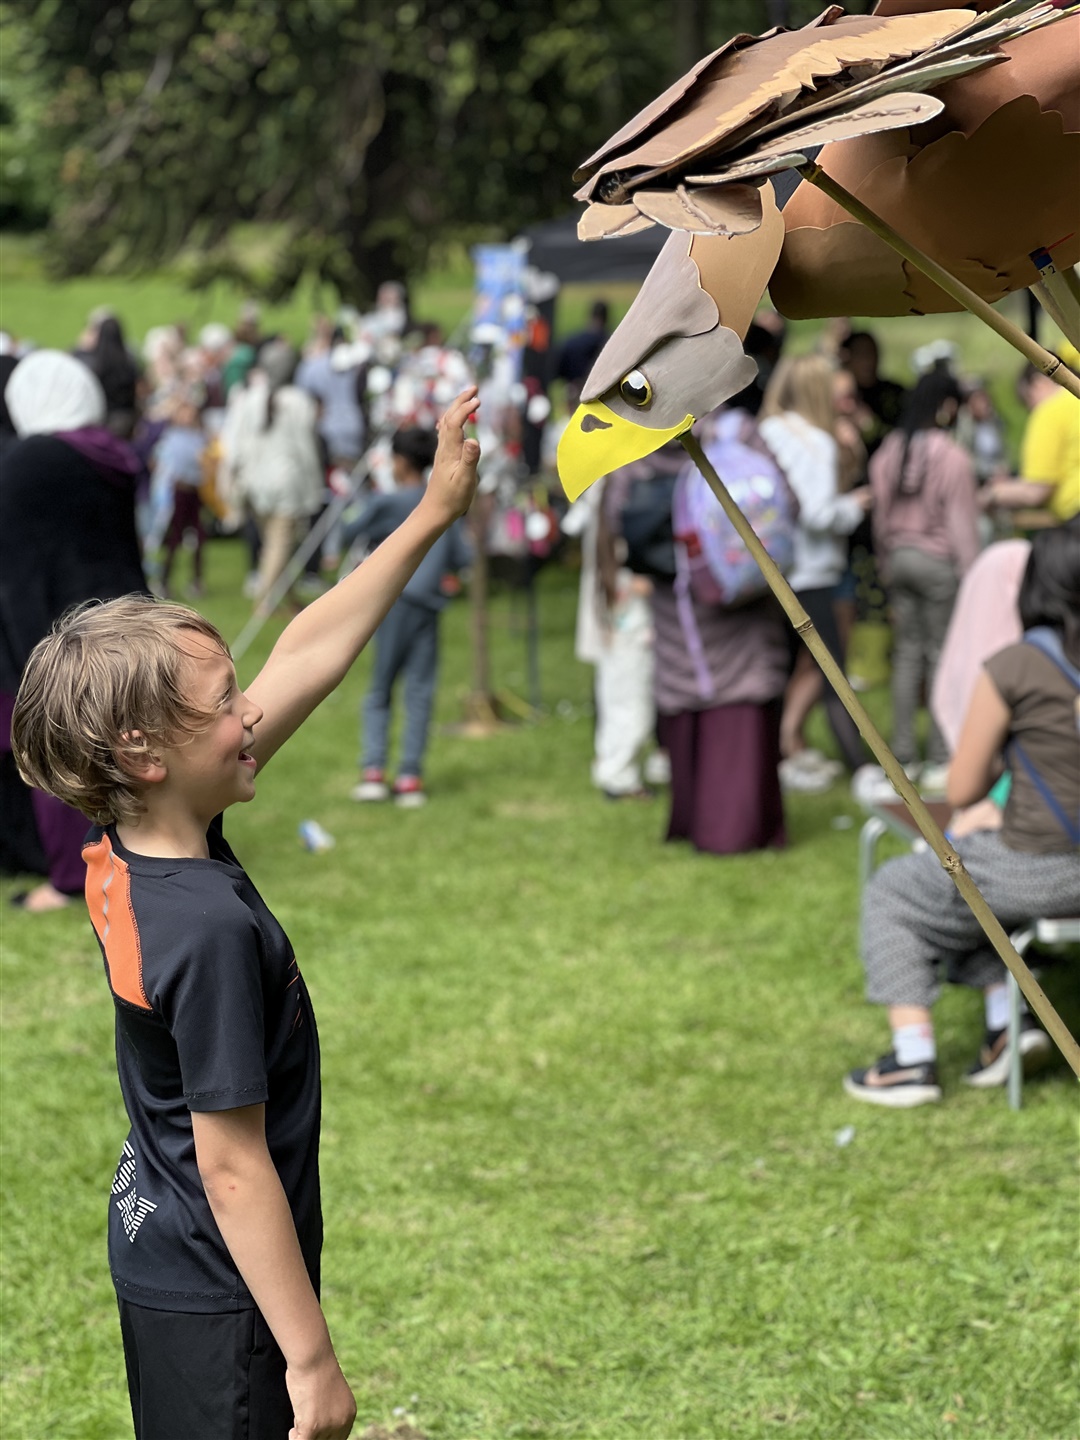 A young boy is reaching out to touch a model White-tailed Eagle in a park.